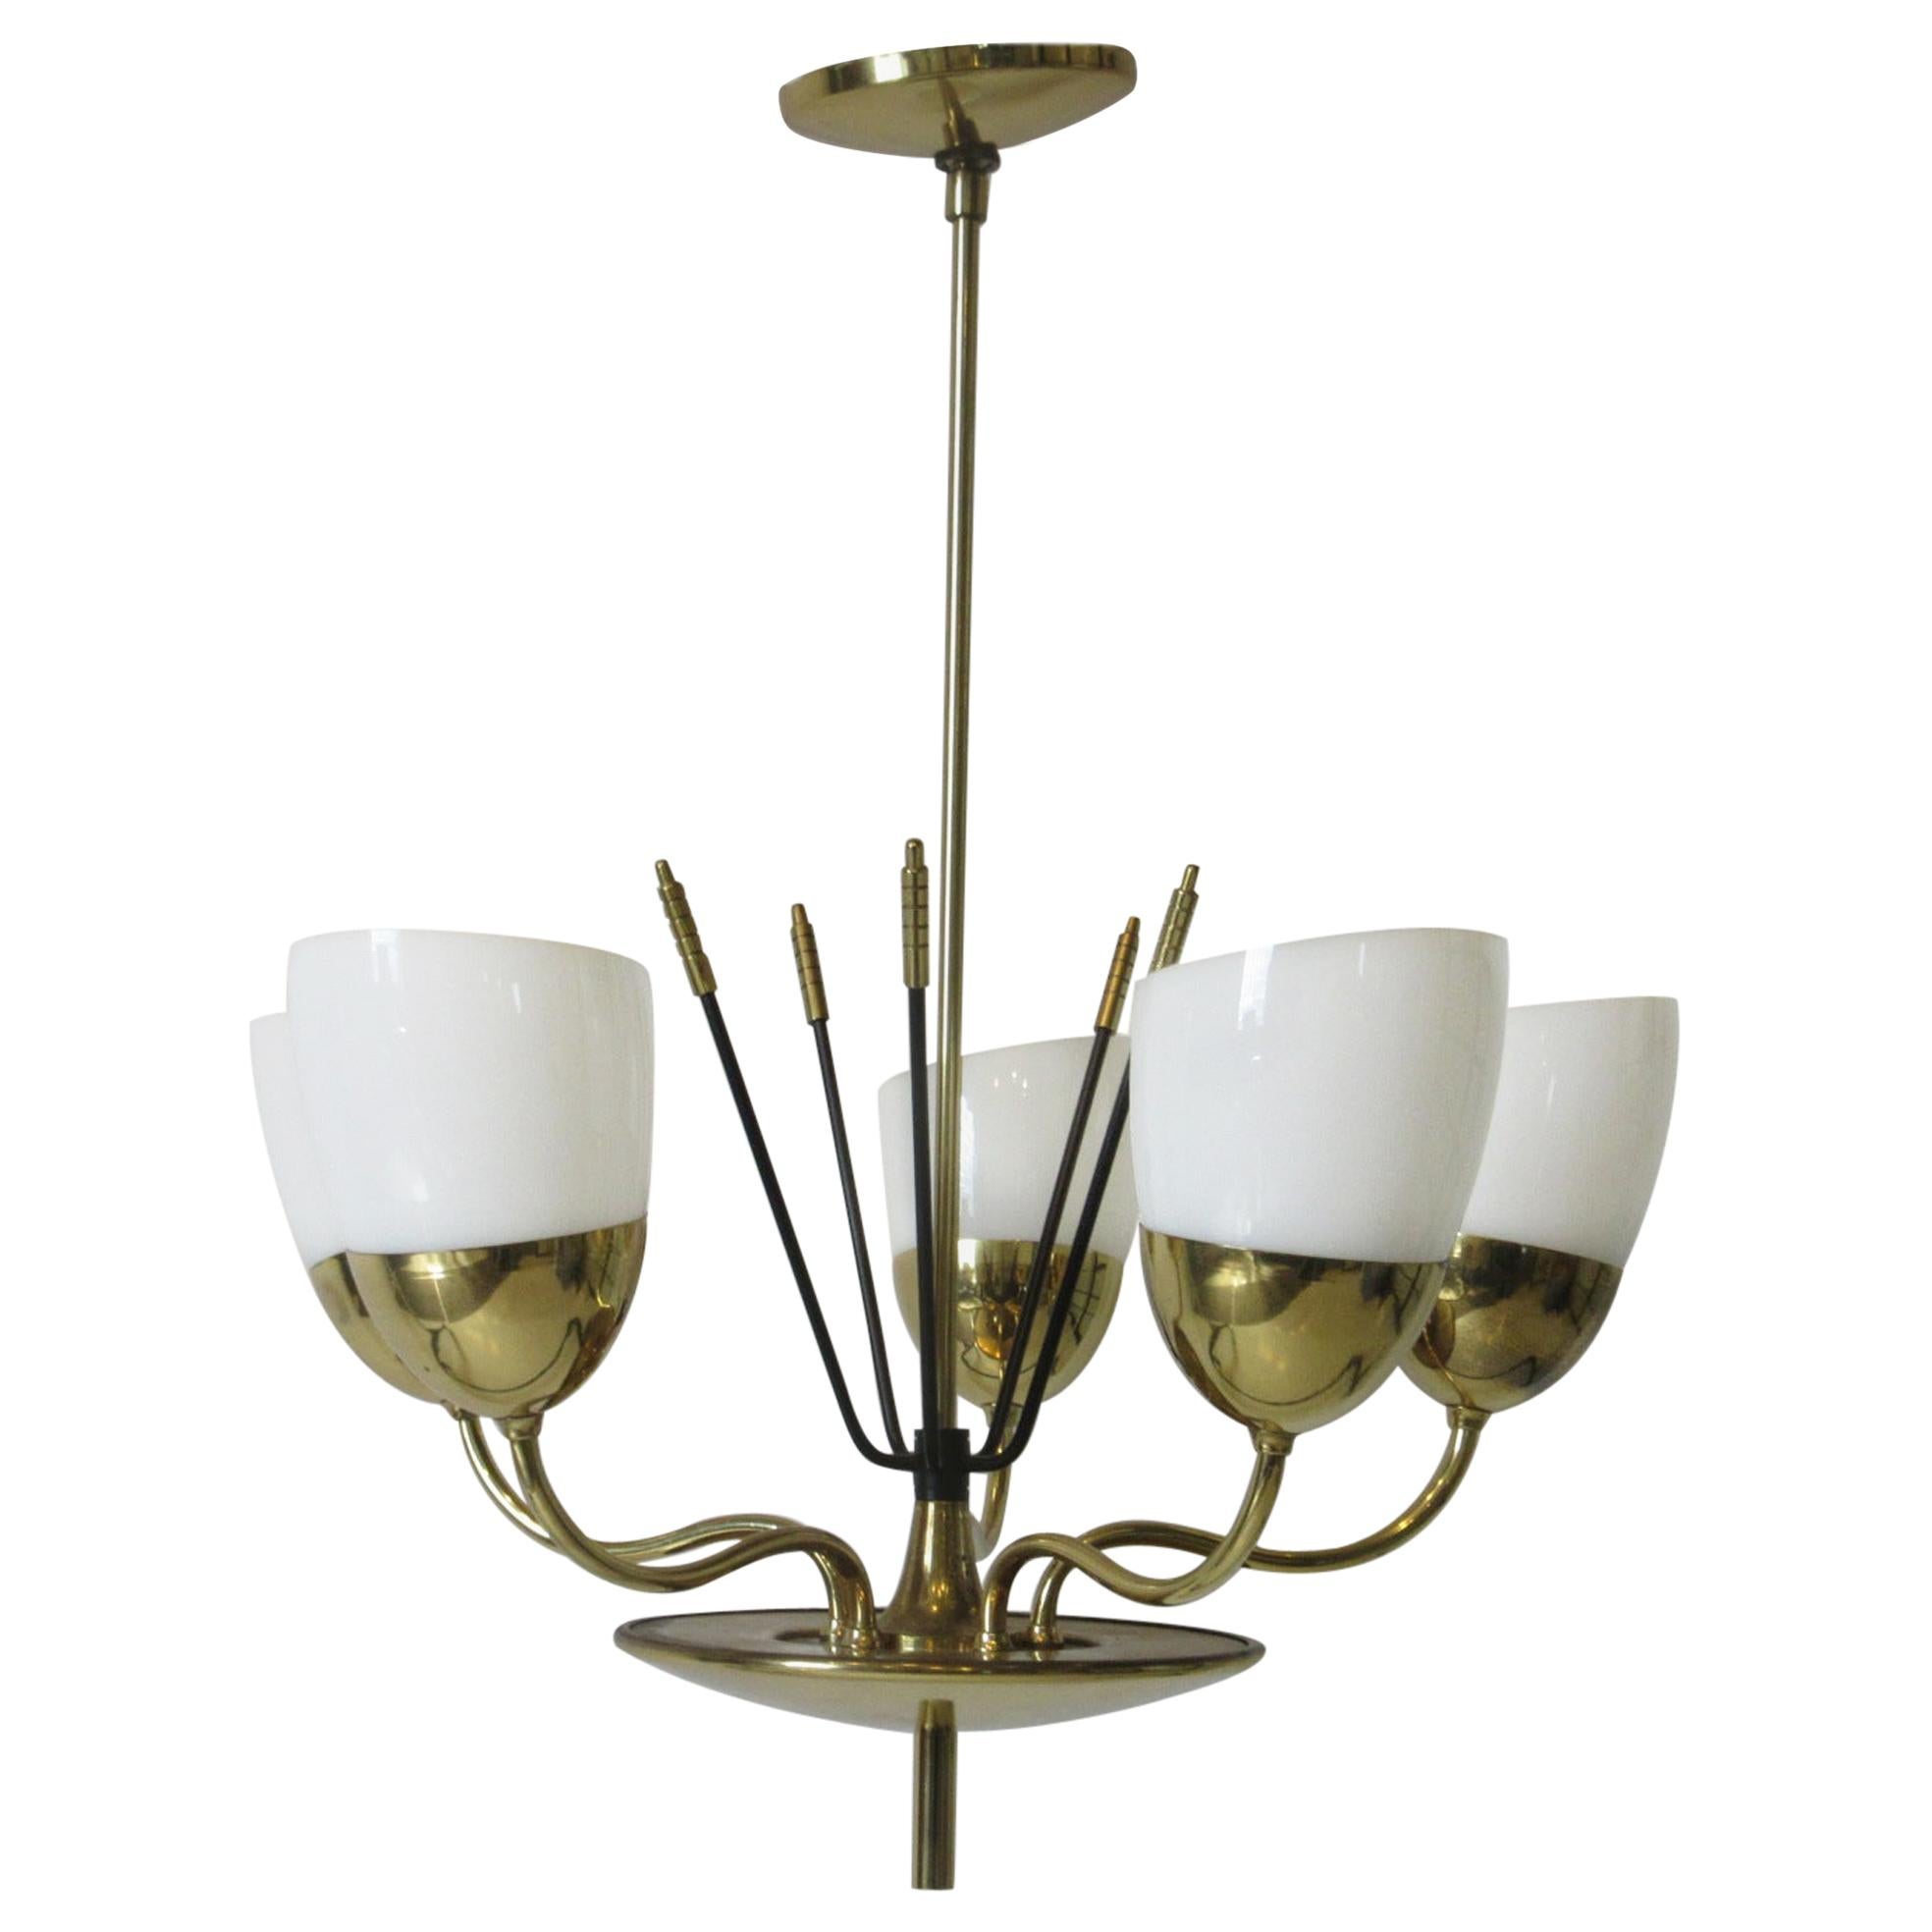 Brass and Glass Chandelier by Majestic in the Style of Arredoluce